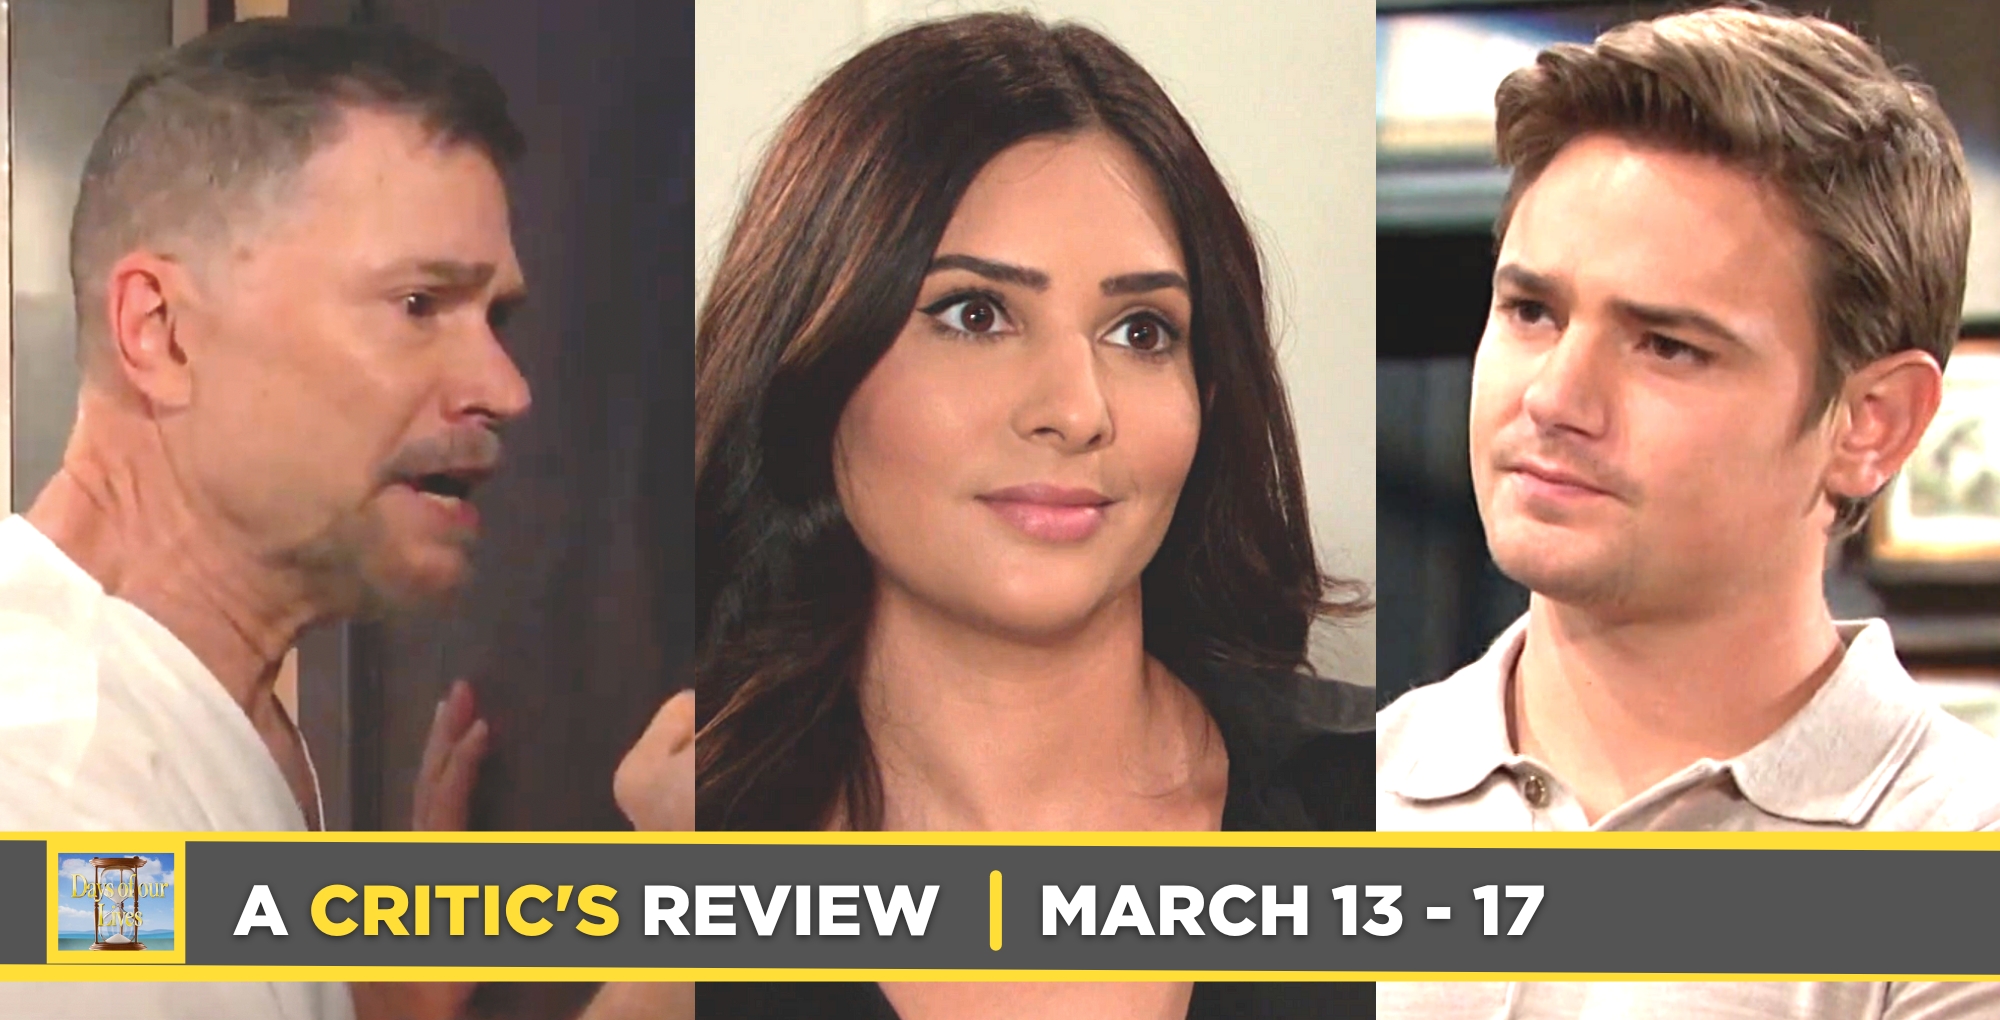 days of our lives critic's review for march 13 – march 17, 2023. three images bo, gabi, and johnny